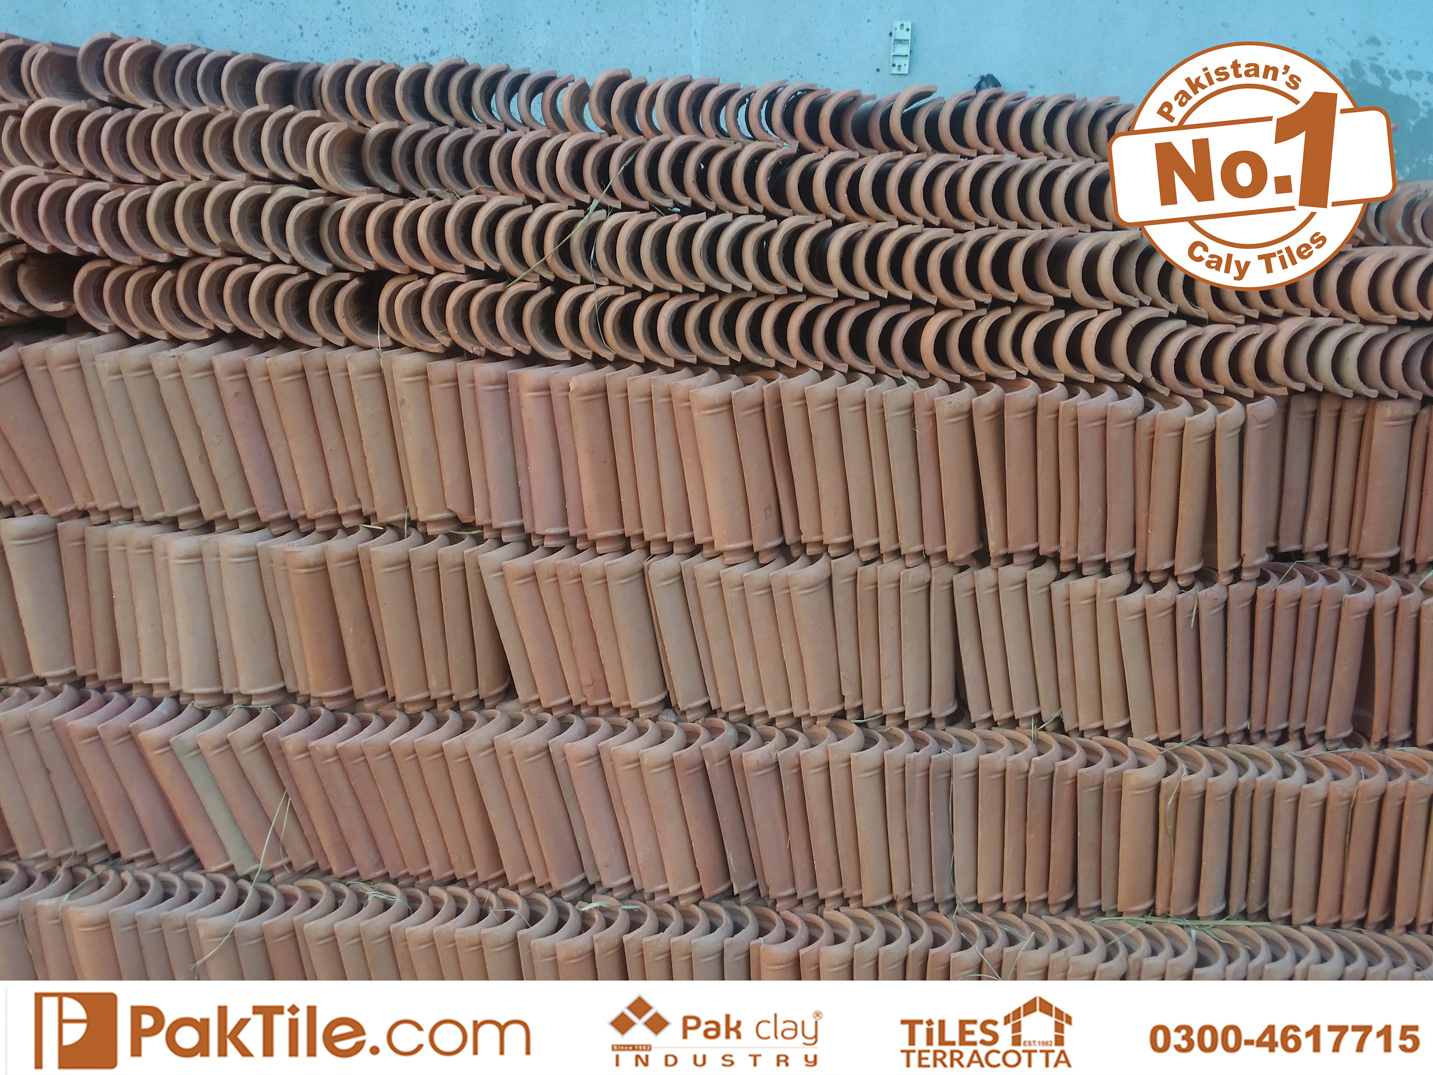 3 Terracotta House Building Roof Materials English Khaprail Roof Tiles Patterns Shop in Islamabad Images